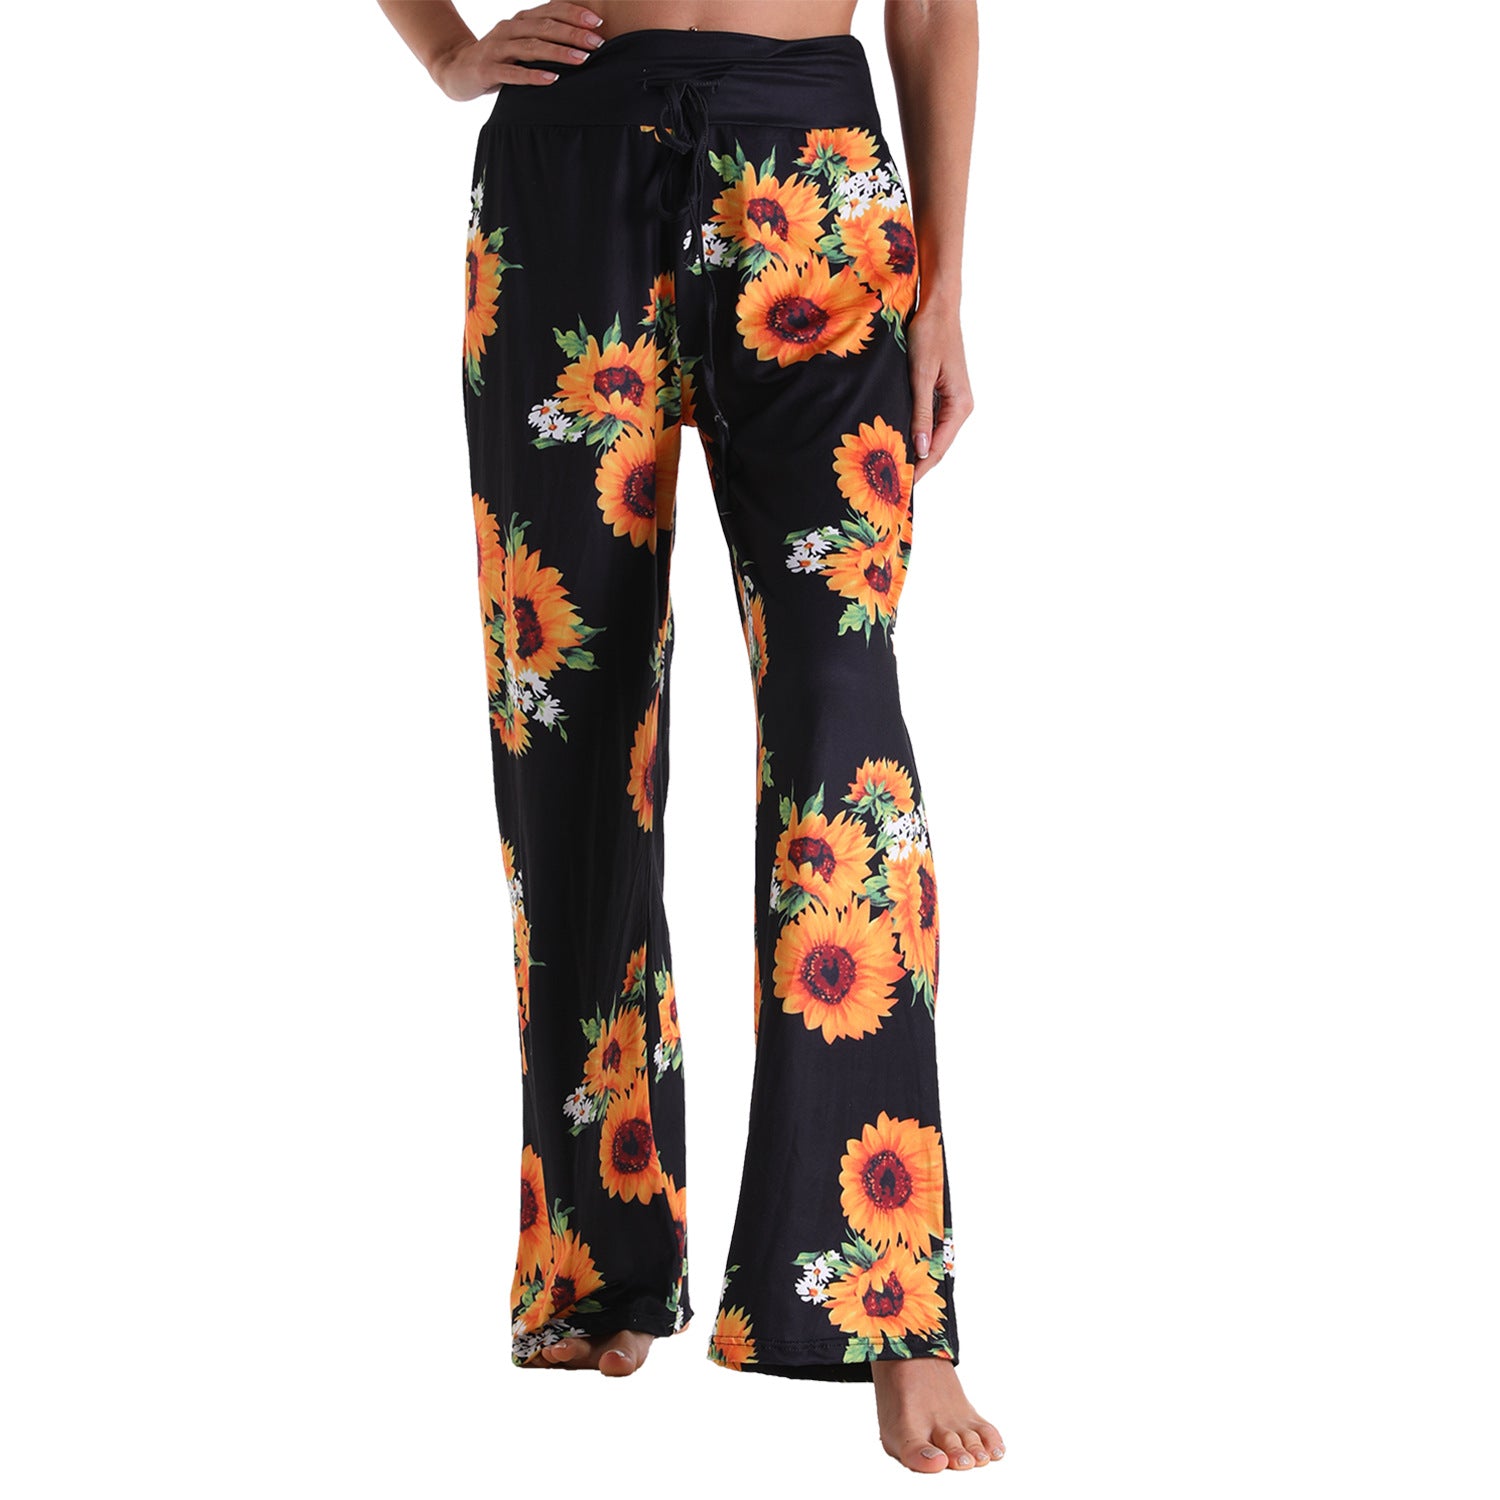 Casual Floral Print Women High Waist Trousers-Pajamas-2015-S-Free Shipping at meselling99